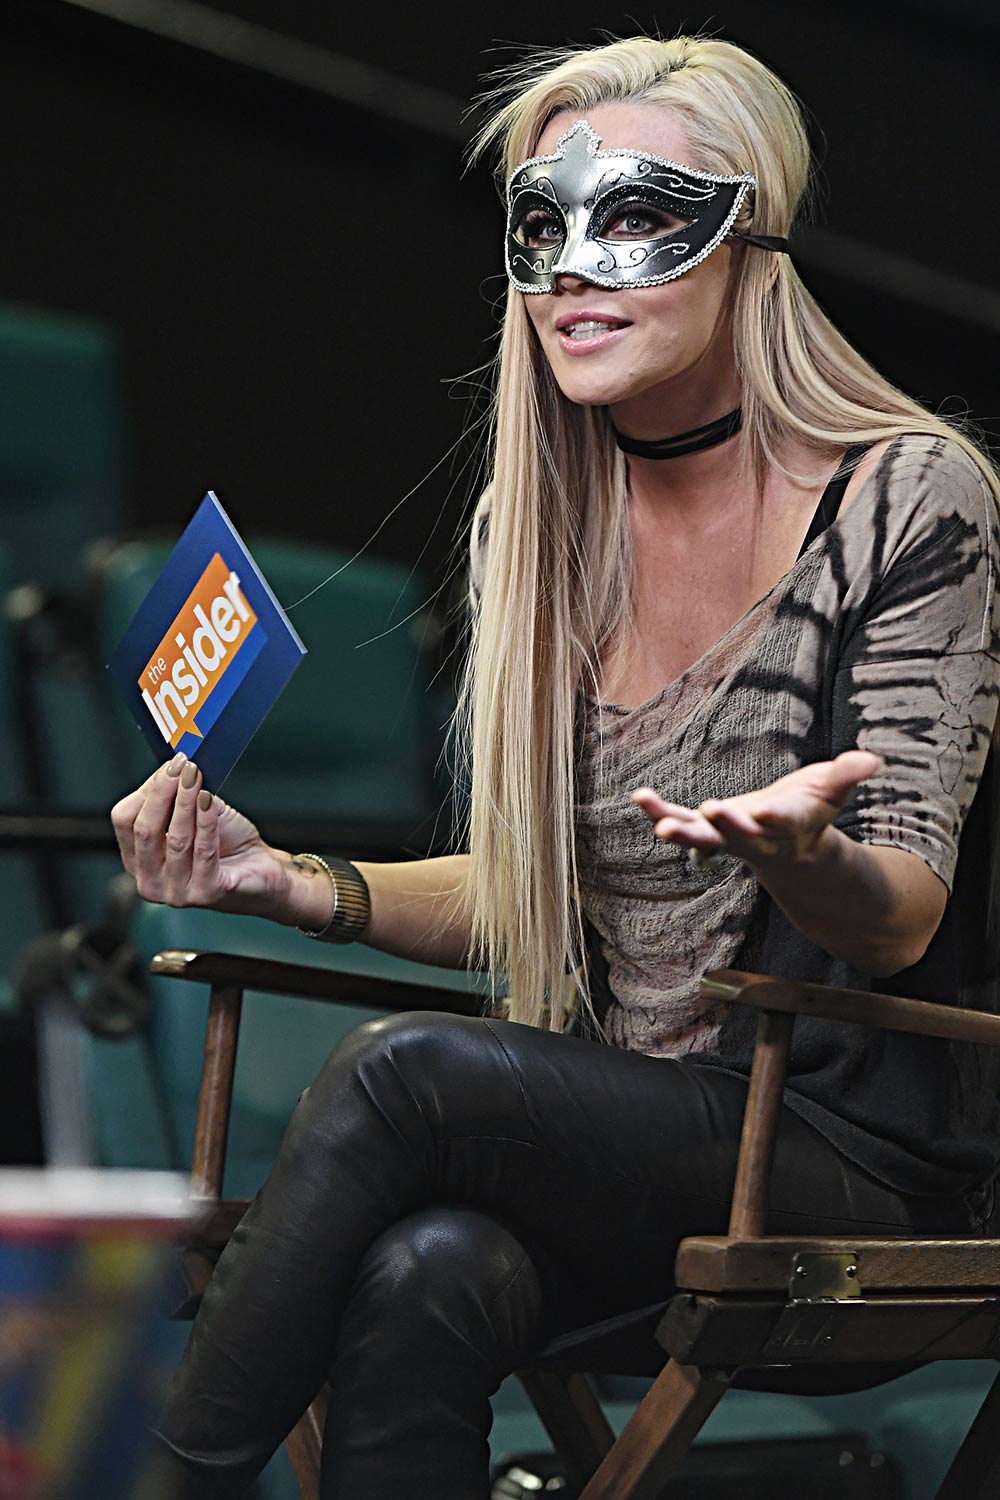 Jenny McCarthy attends a special edition Of The Jenny McCarthy Show